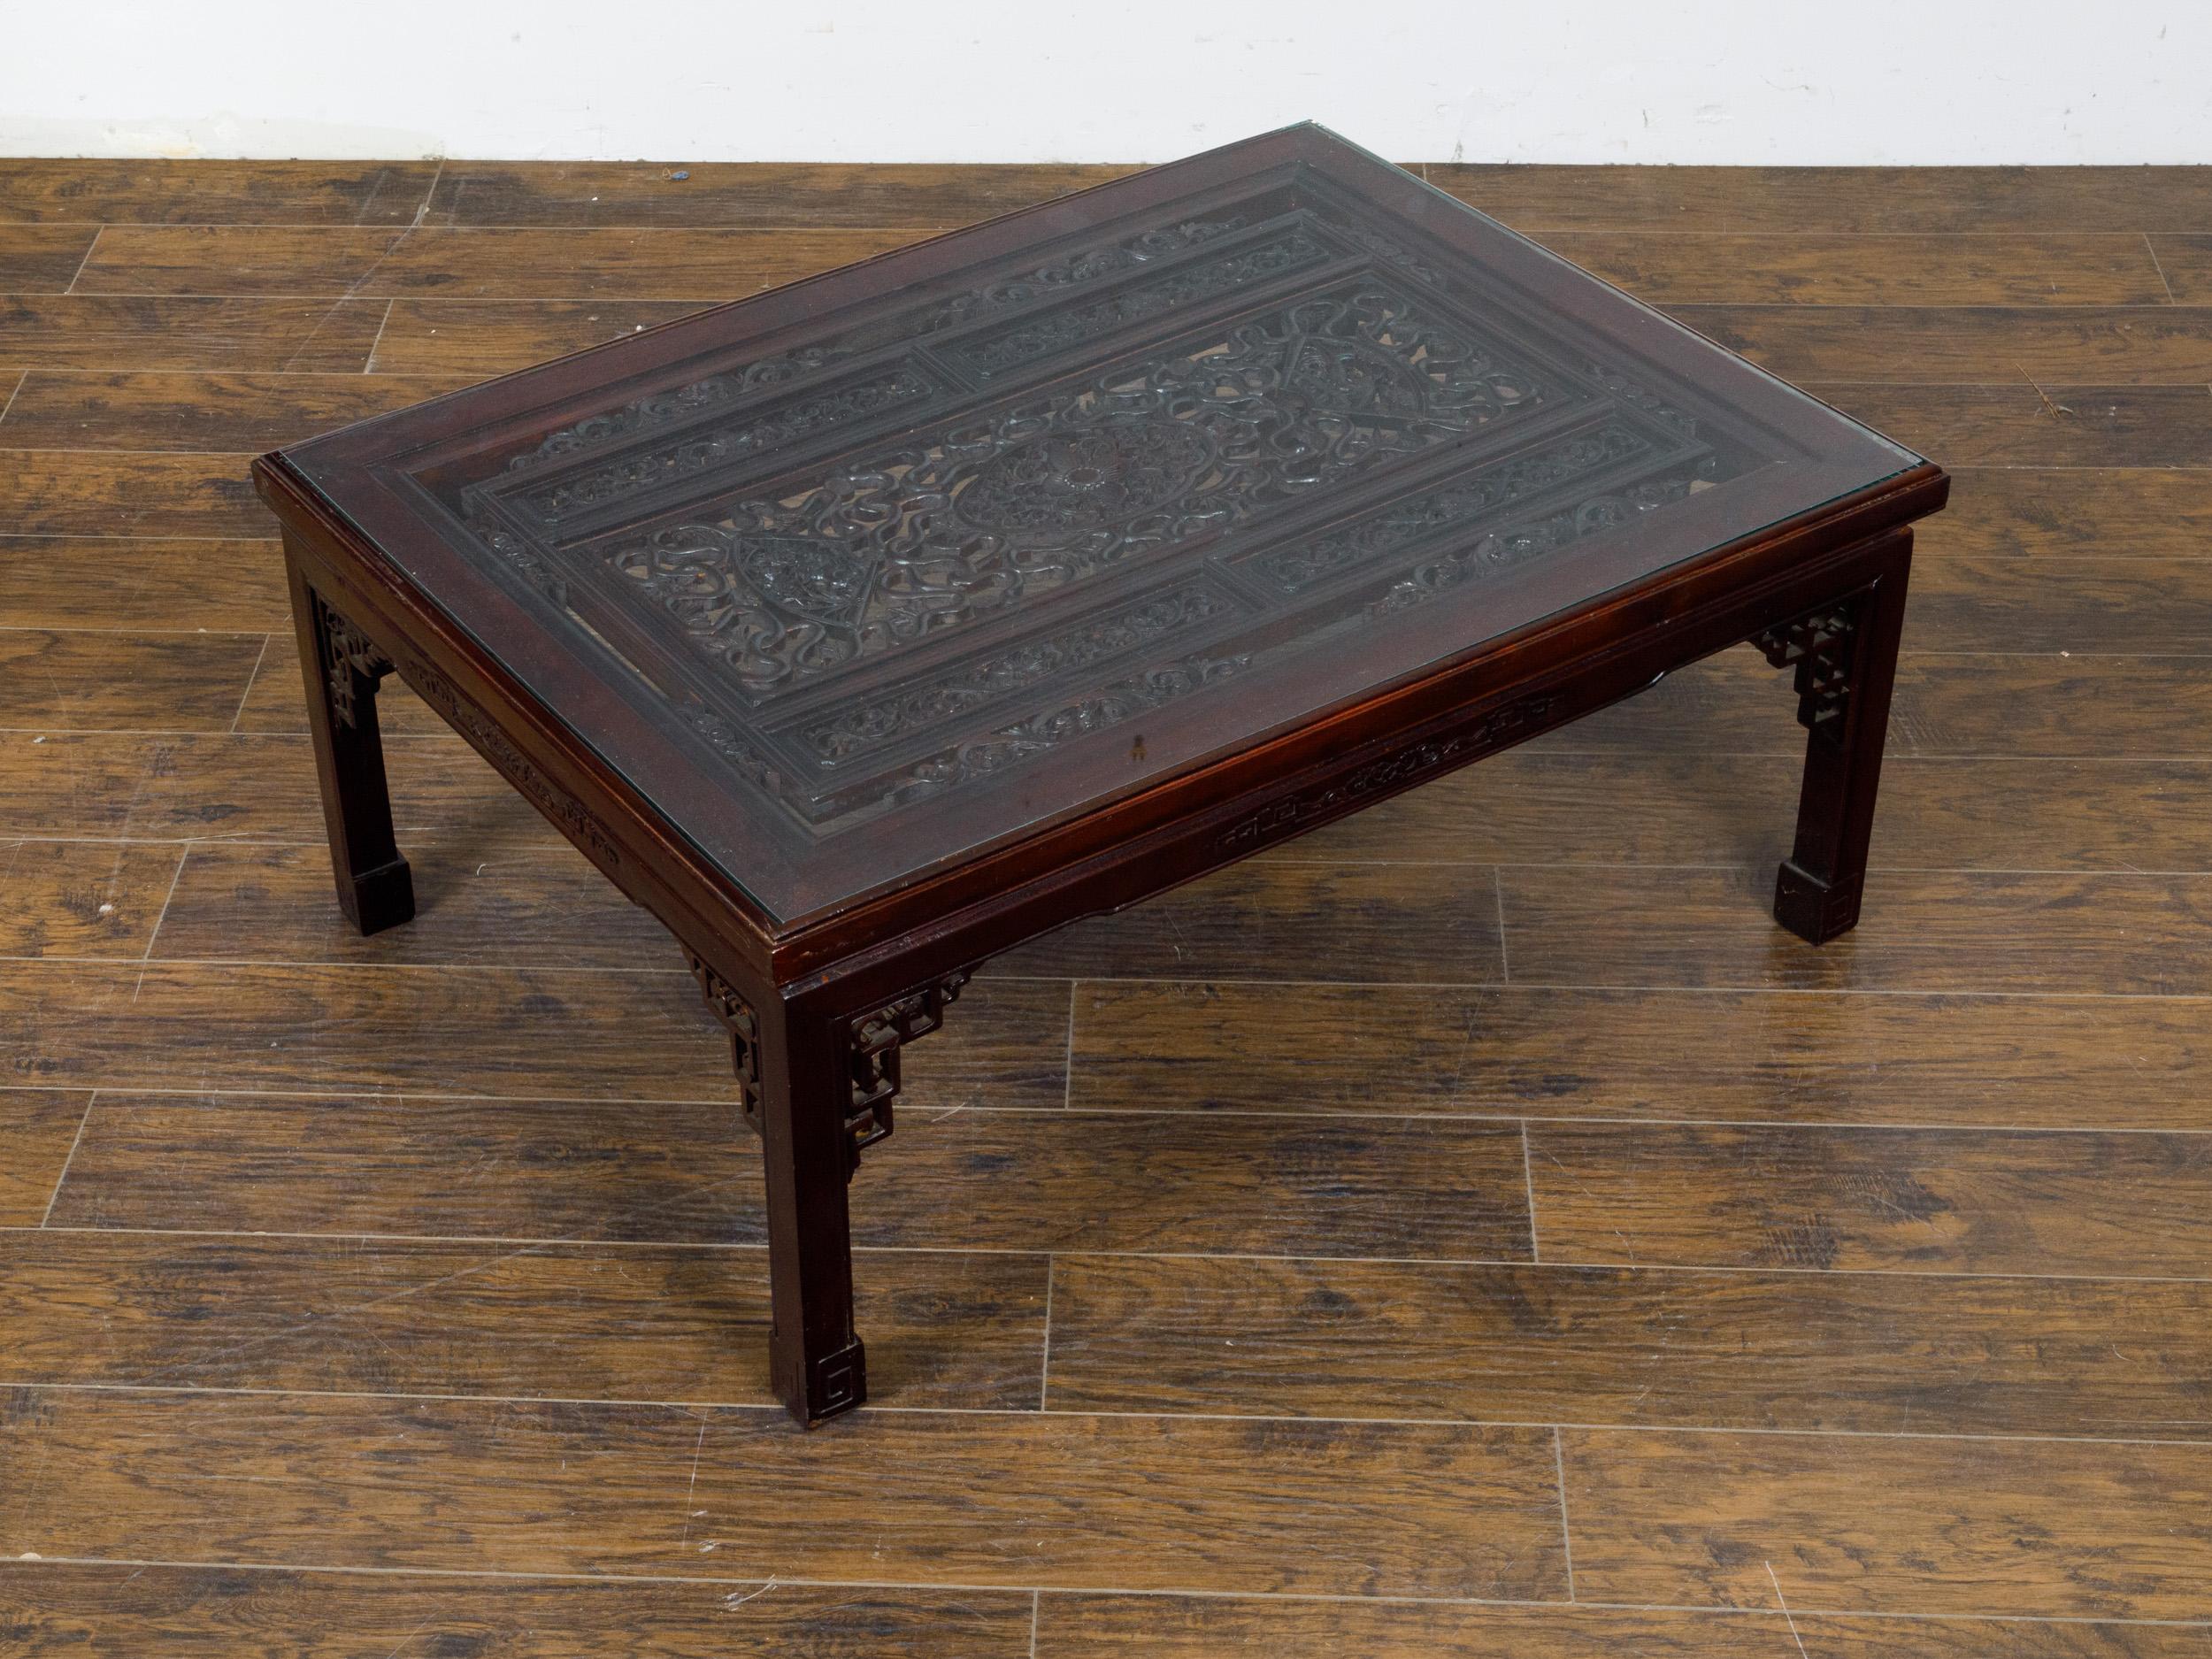 20th Century Glass Top Coffee Table with Fretwork Motifs and Scrolling Feet, circa 1950 For Sale